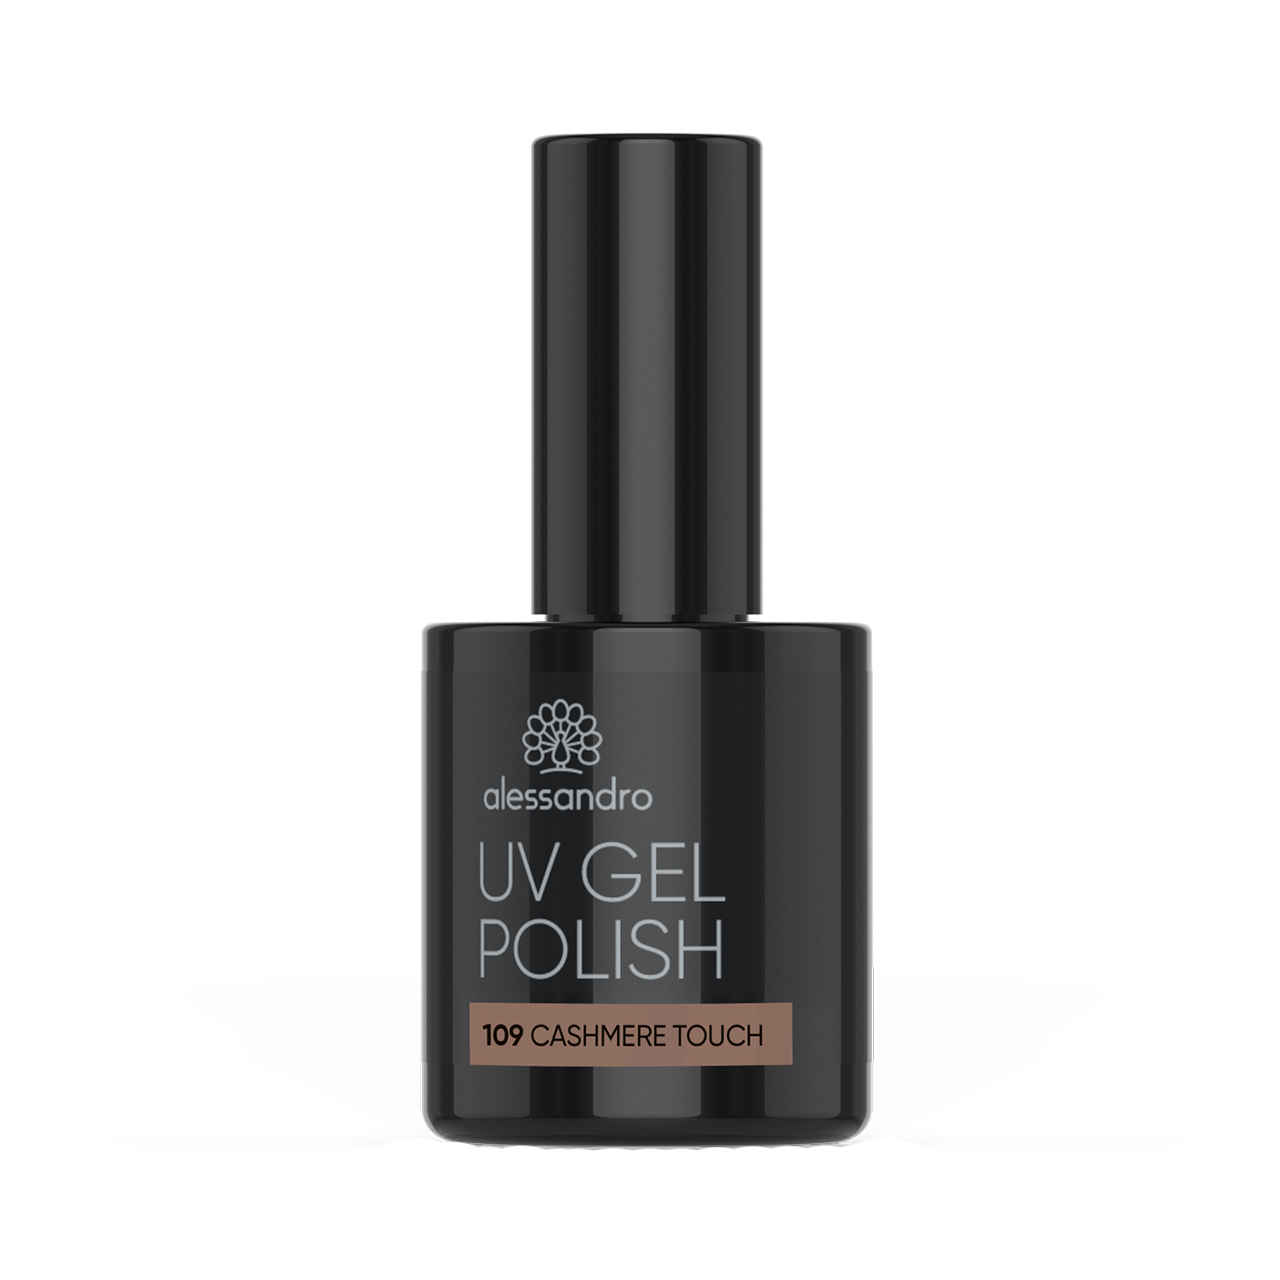 UV Gel Polish Chashmere Touch